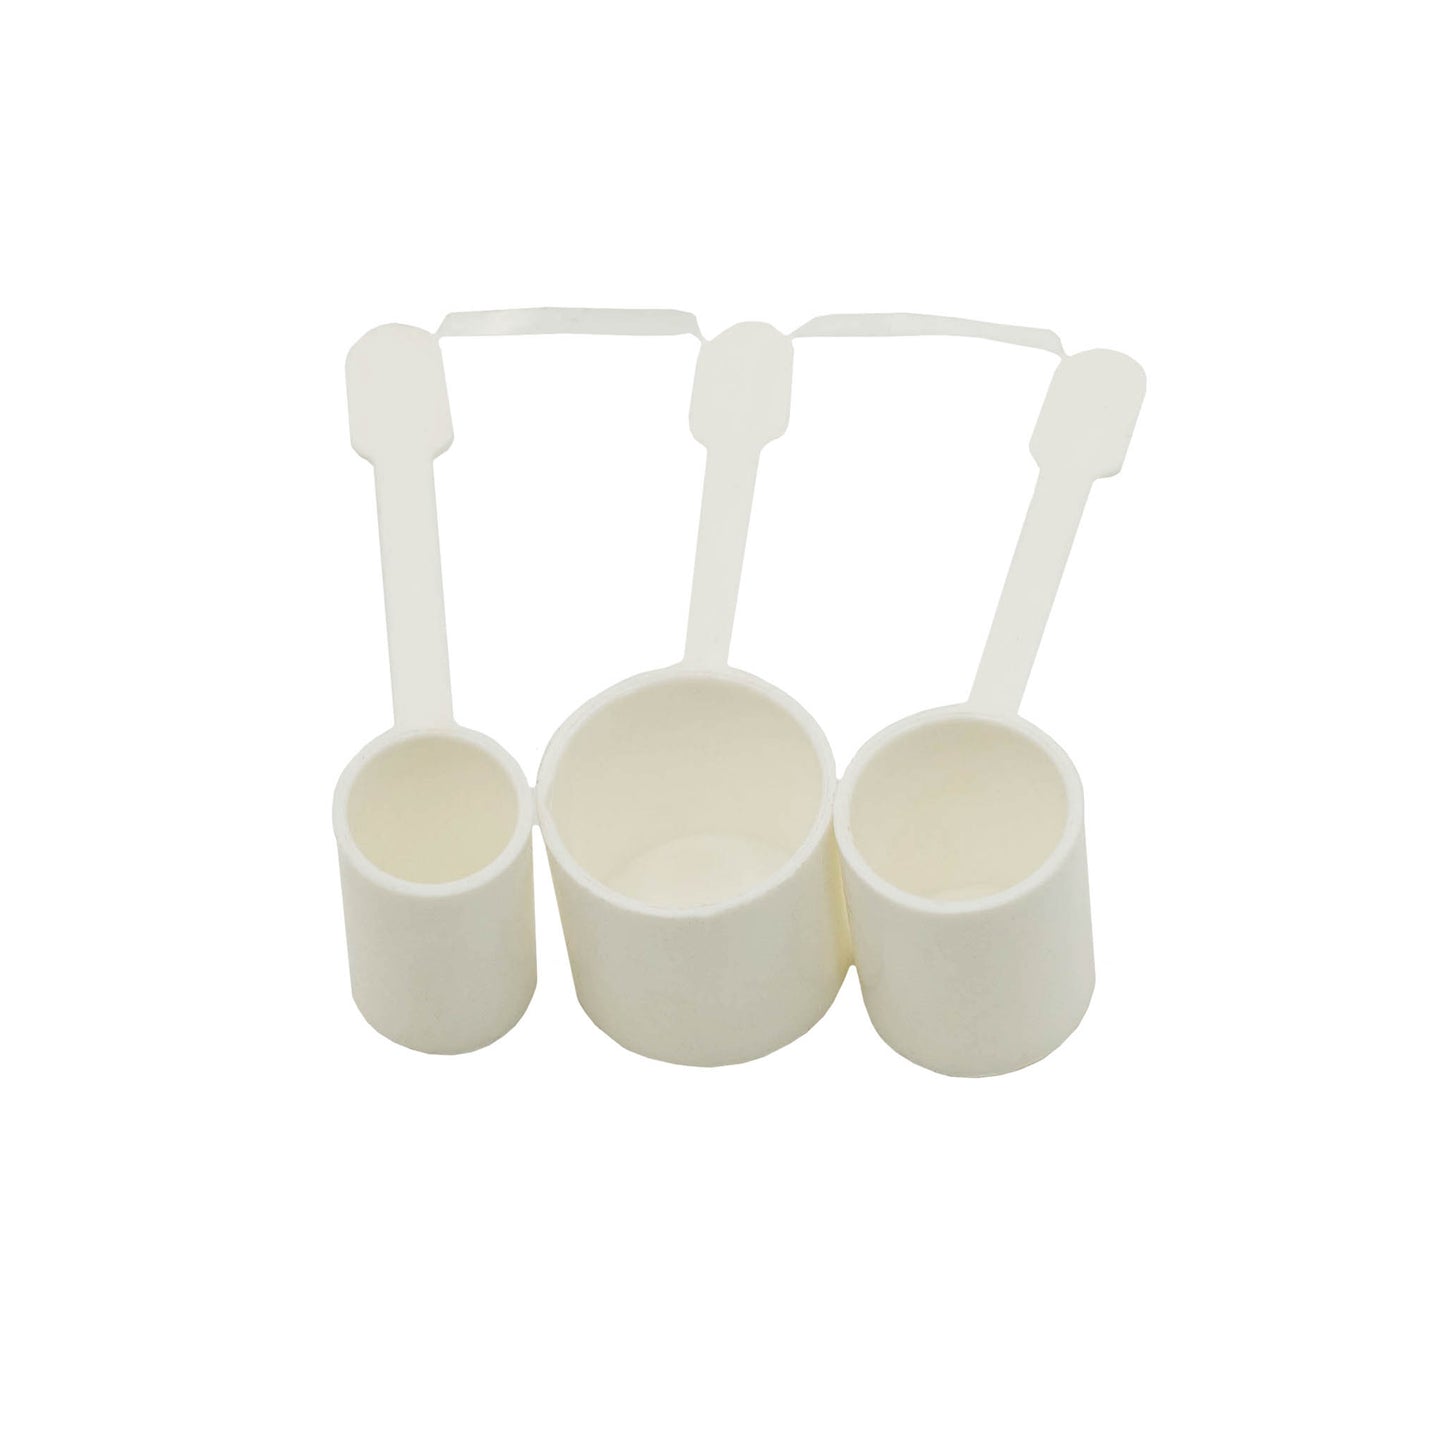 3 way measuring scoops for carbonating beer, cider or adding sugar to wine